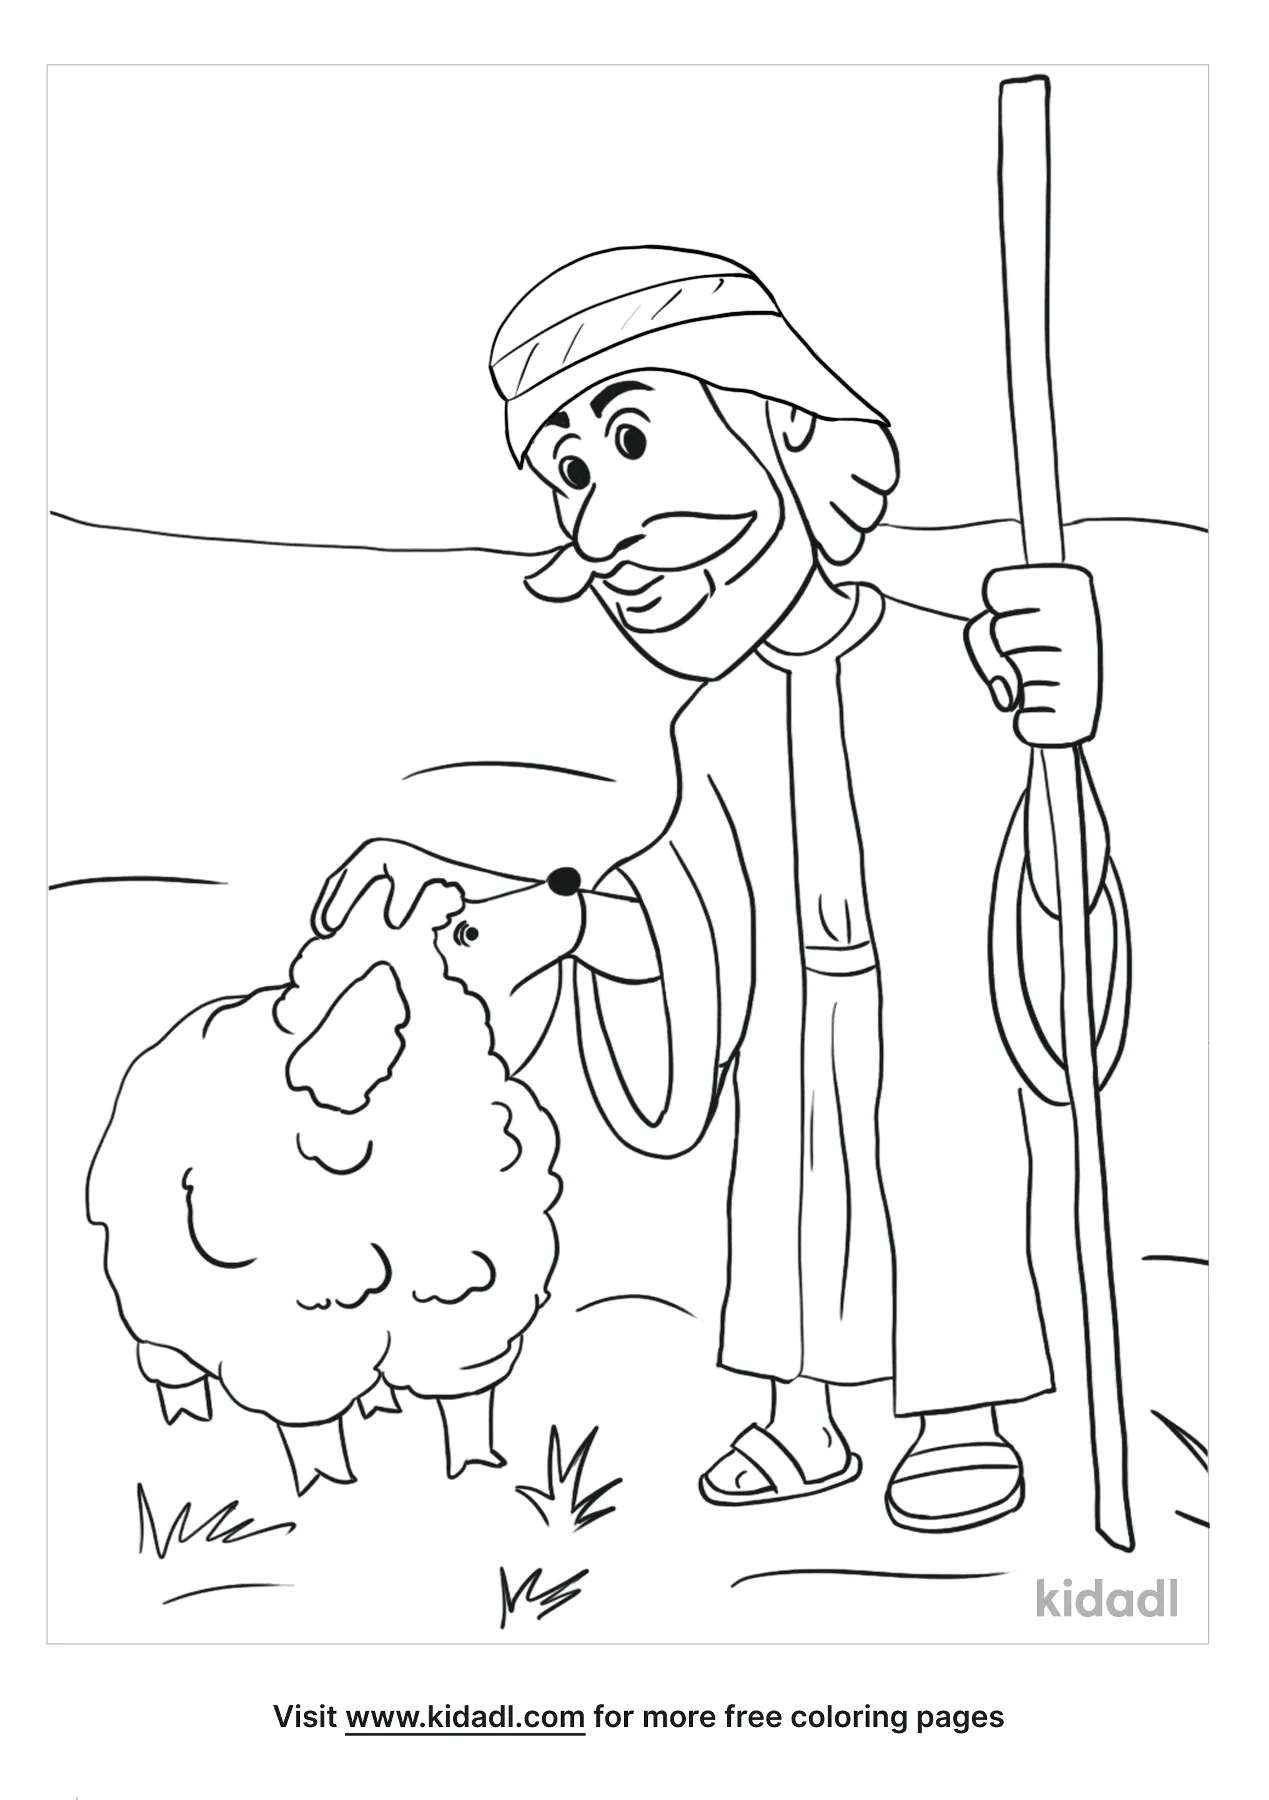 Parable Of The Lost Sheep Coloring Pages   Free Bible Coloring ...